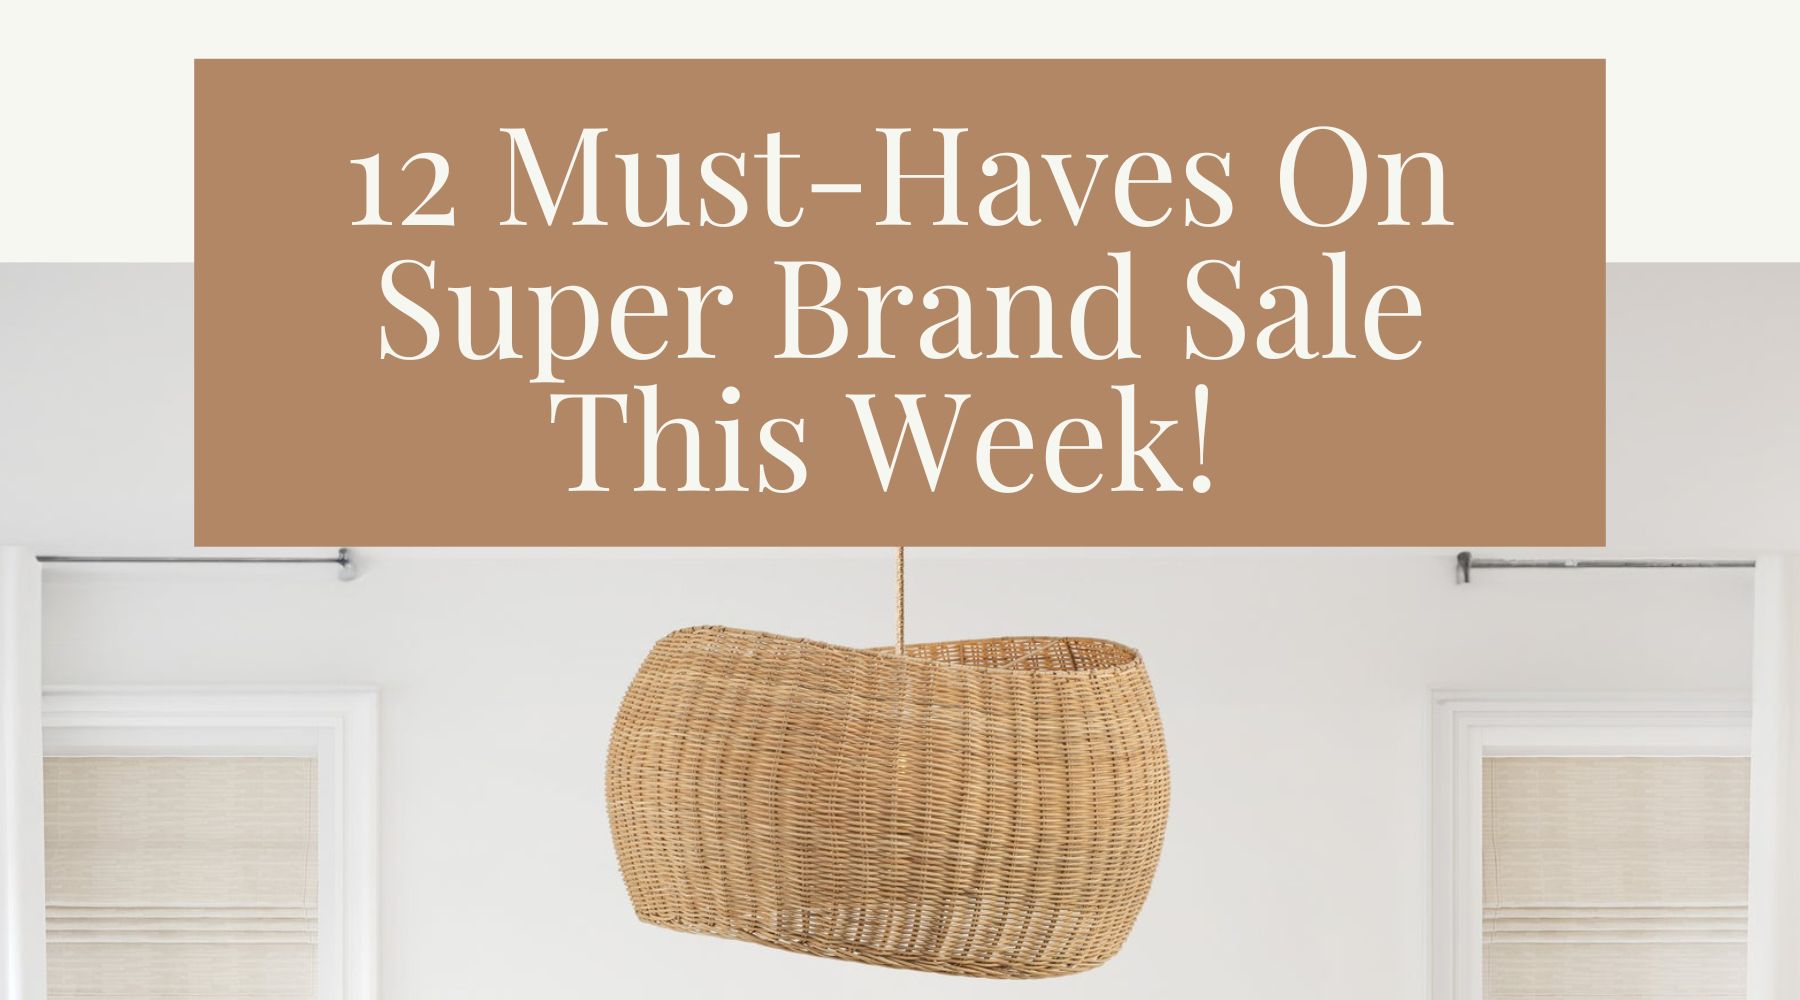 must-haves on super brand sale this week